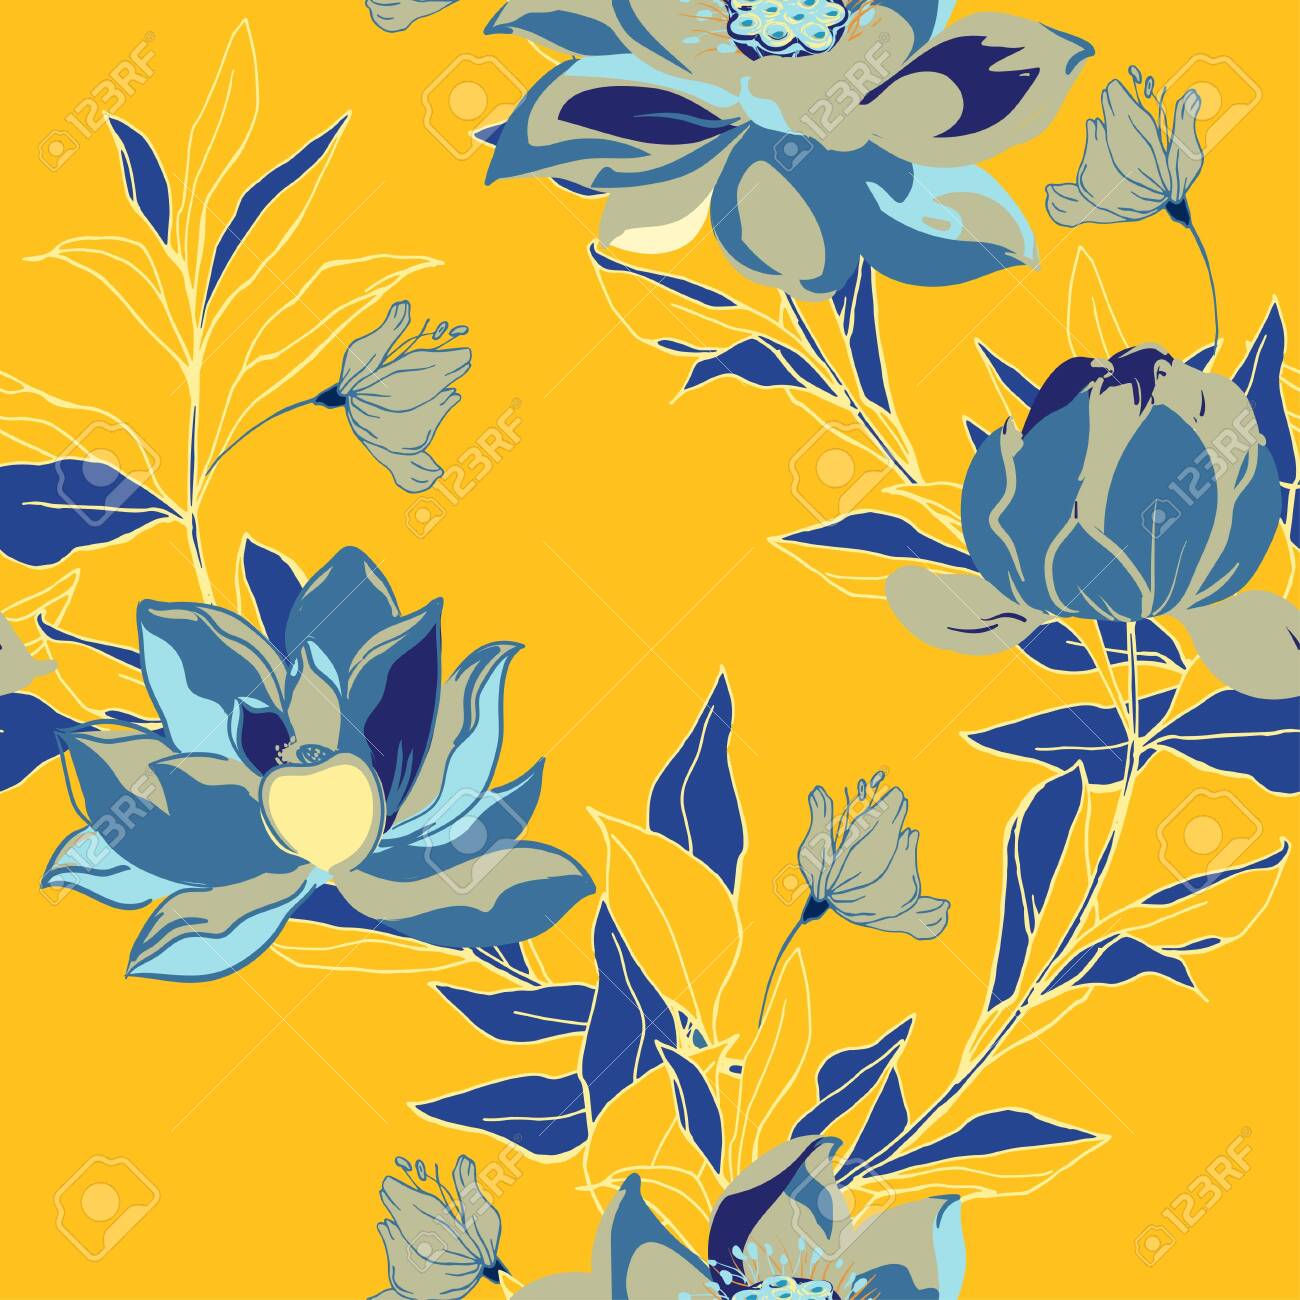 Abstract Illustration Of Blue Flowers And Leaves On A Yellow Color